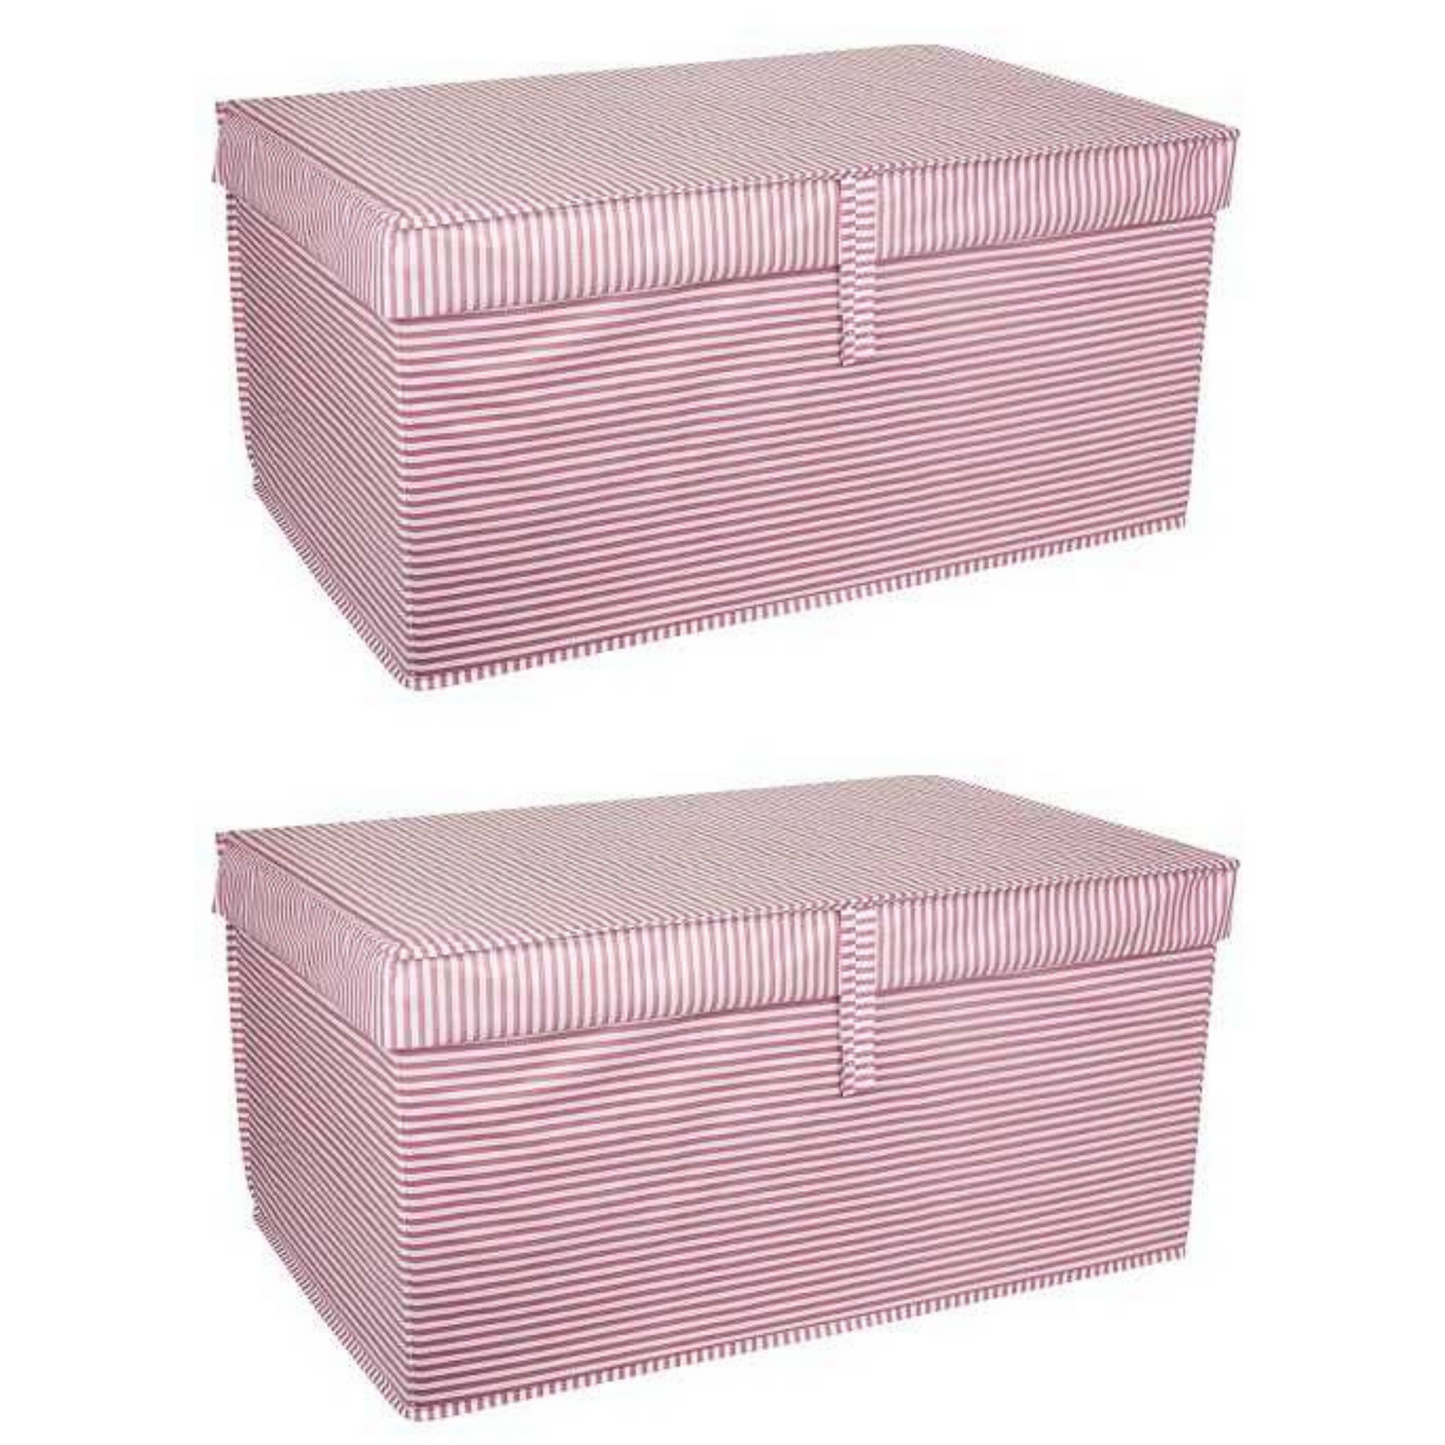 Collapsible Wardrobe Storage Organiser Box XL 72L - Foldable fabric Boxes with Lids, , 60cm/40cm/30cm